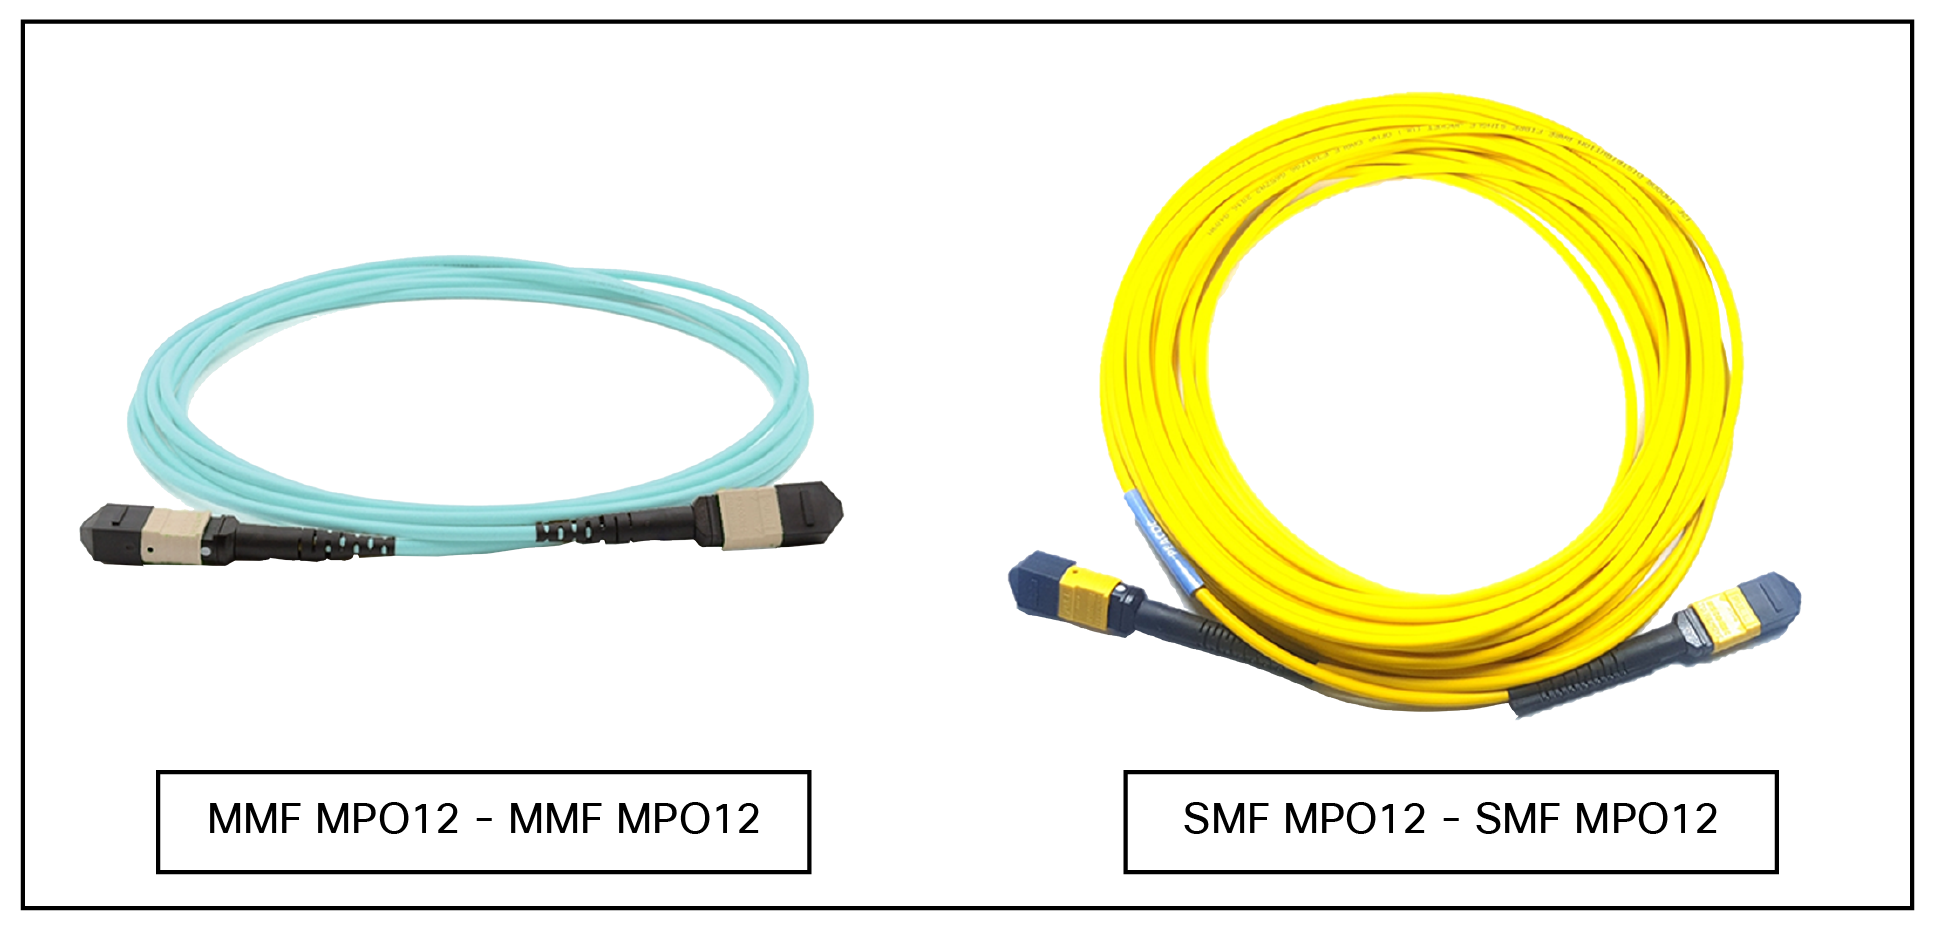 MultiFiber Push-On (MPO) Cables Multi-Mode (MMF) and Single Mode (SMF)